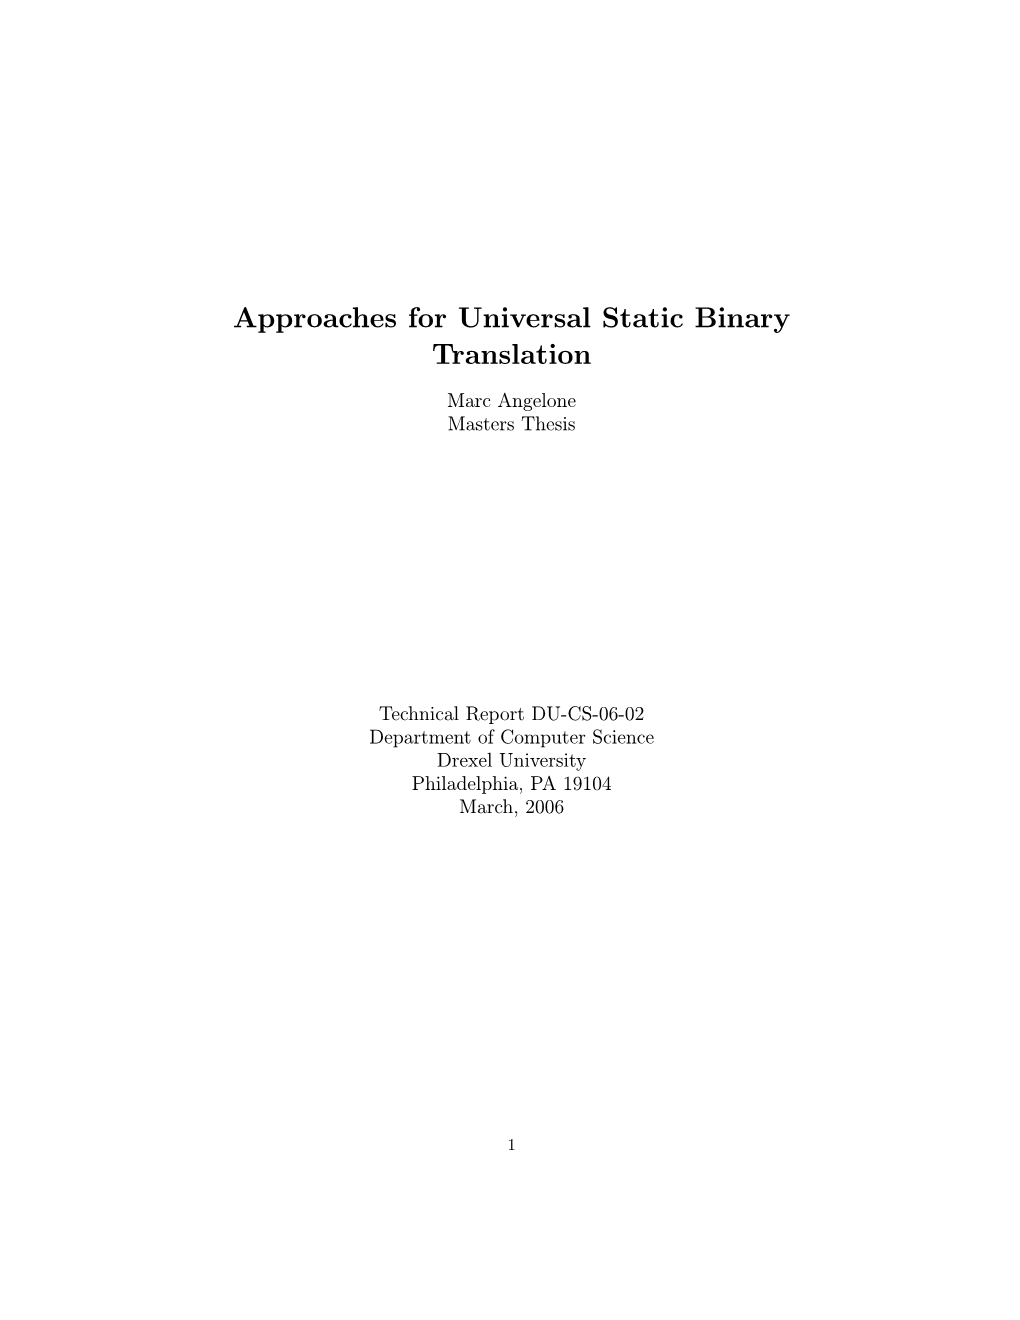 Approaches for Universal Static Binary Translation